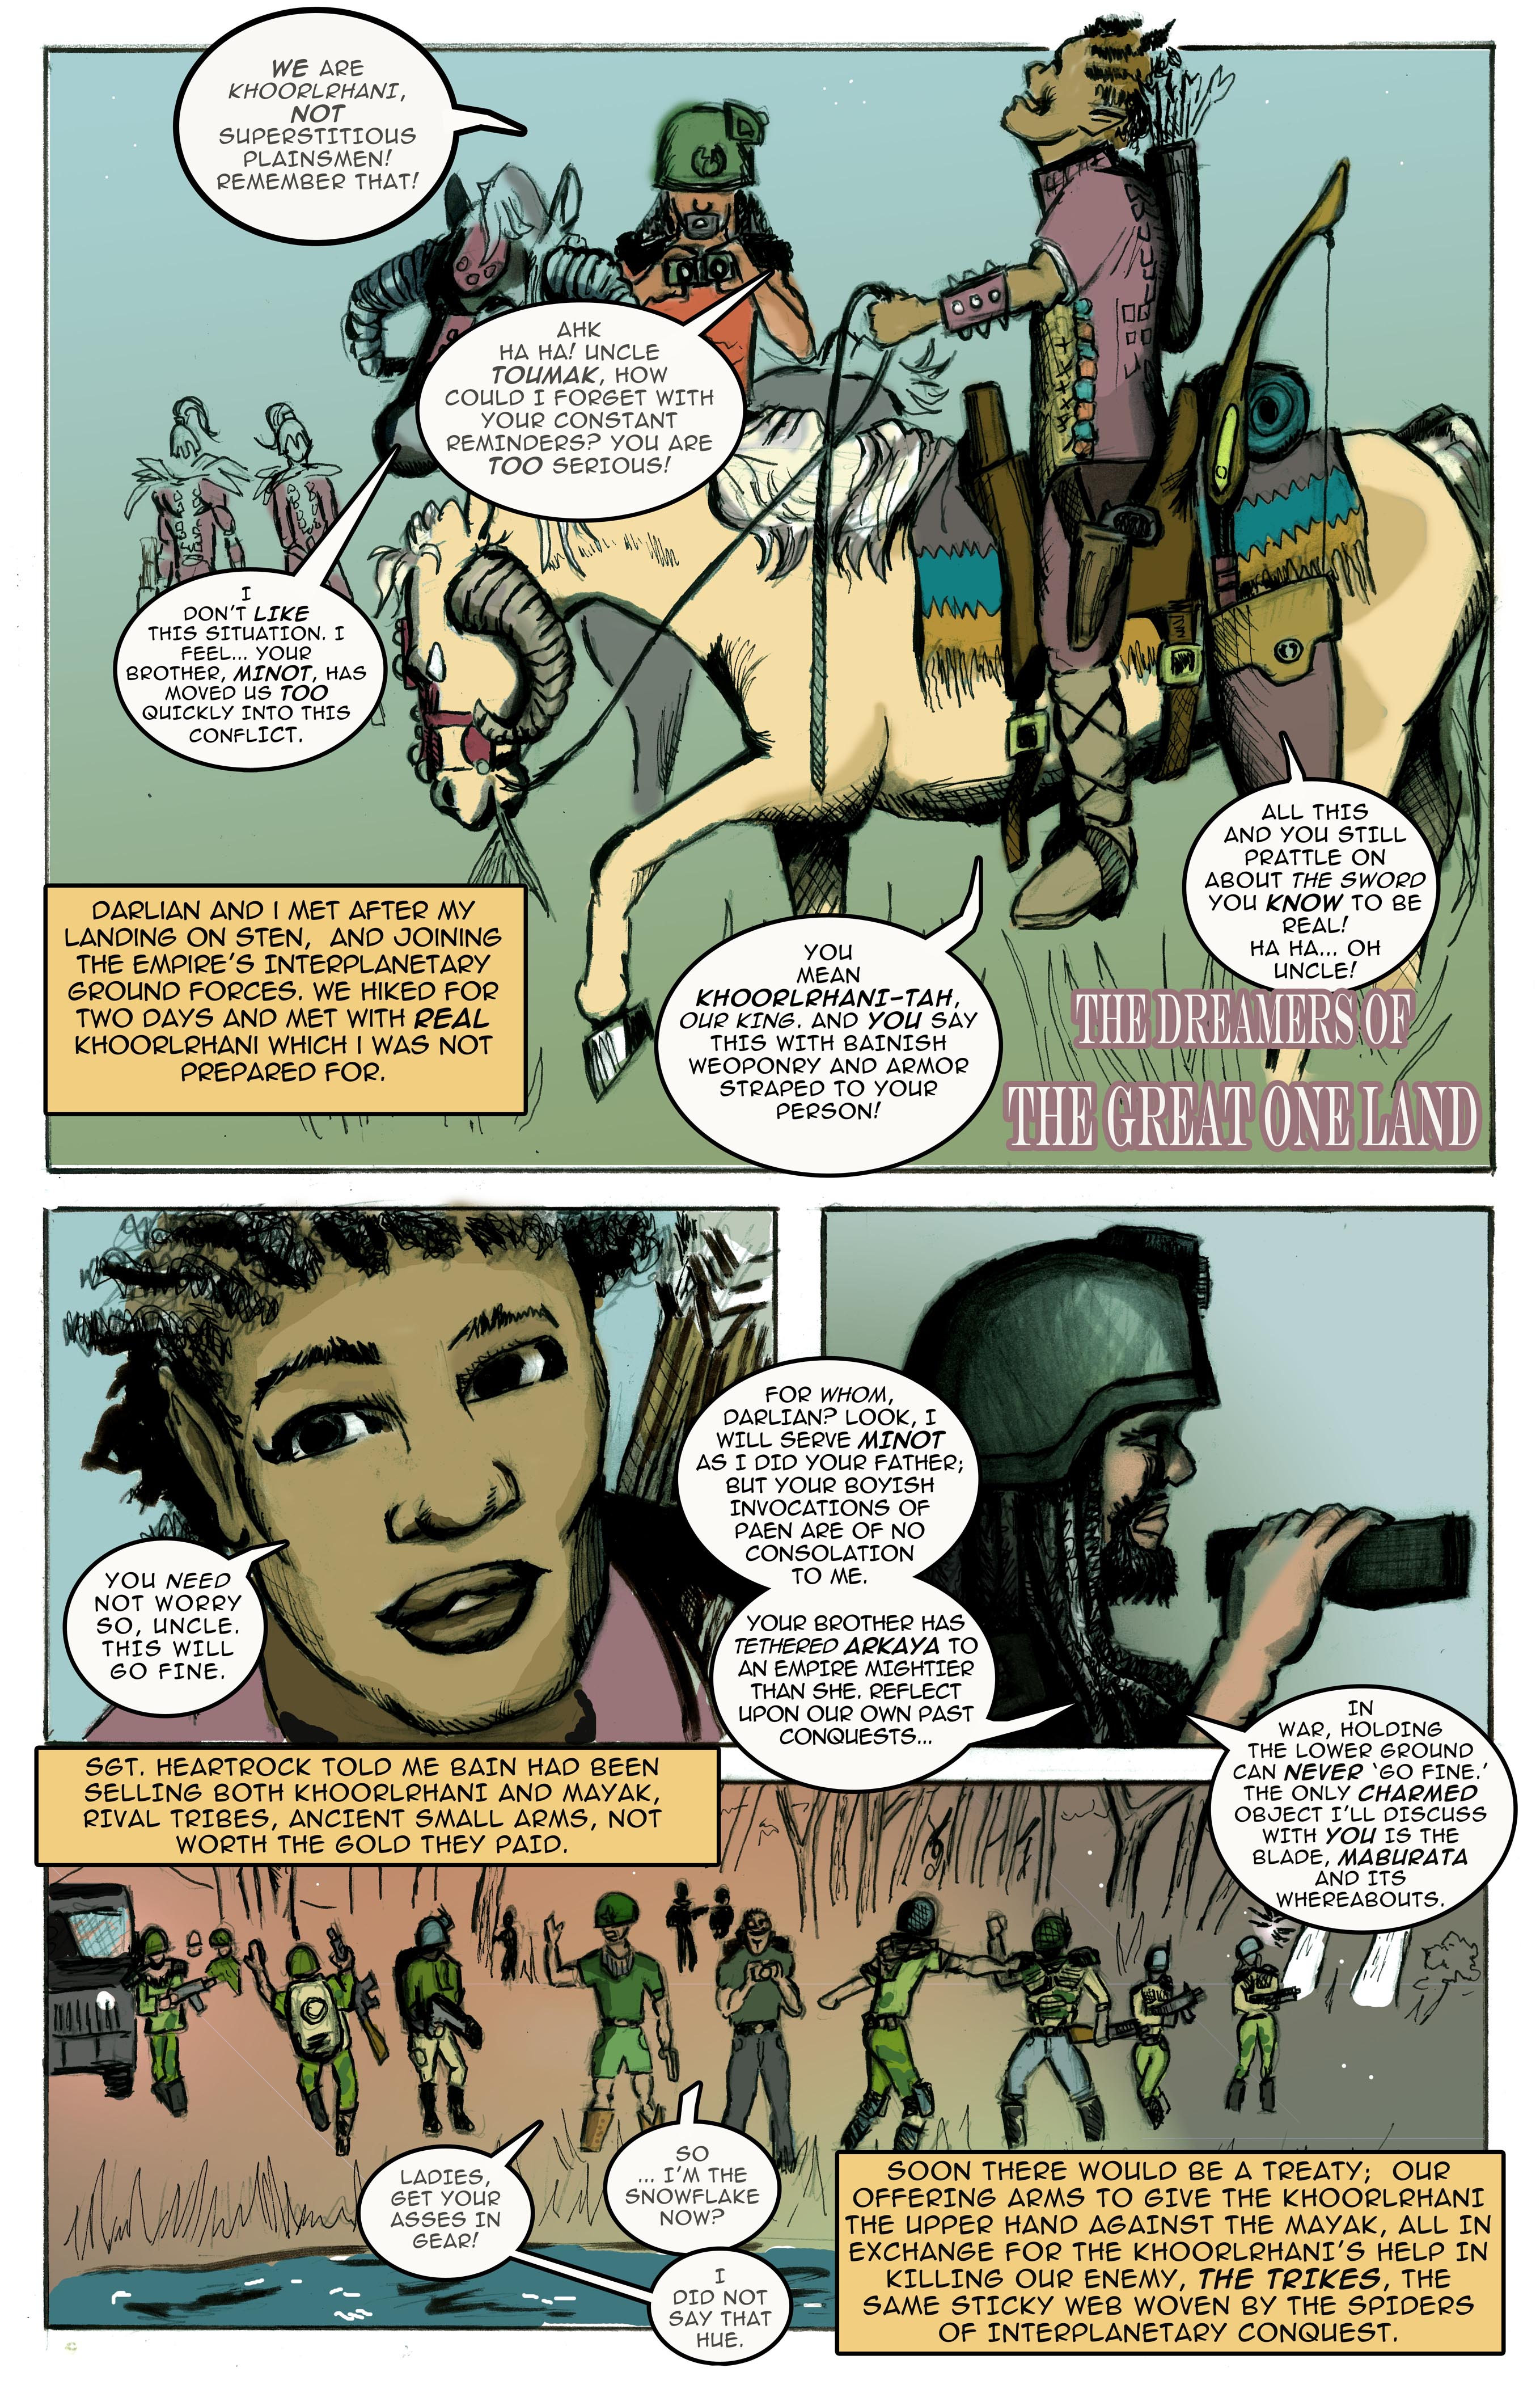 Dreamers of The Great One Land (Page 4)